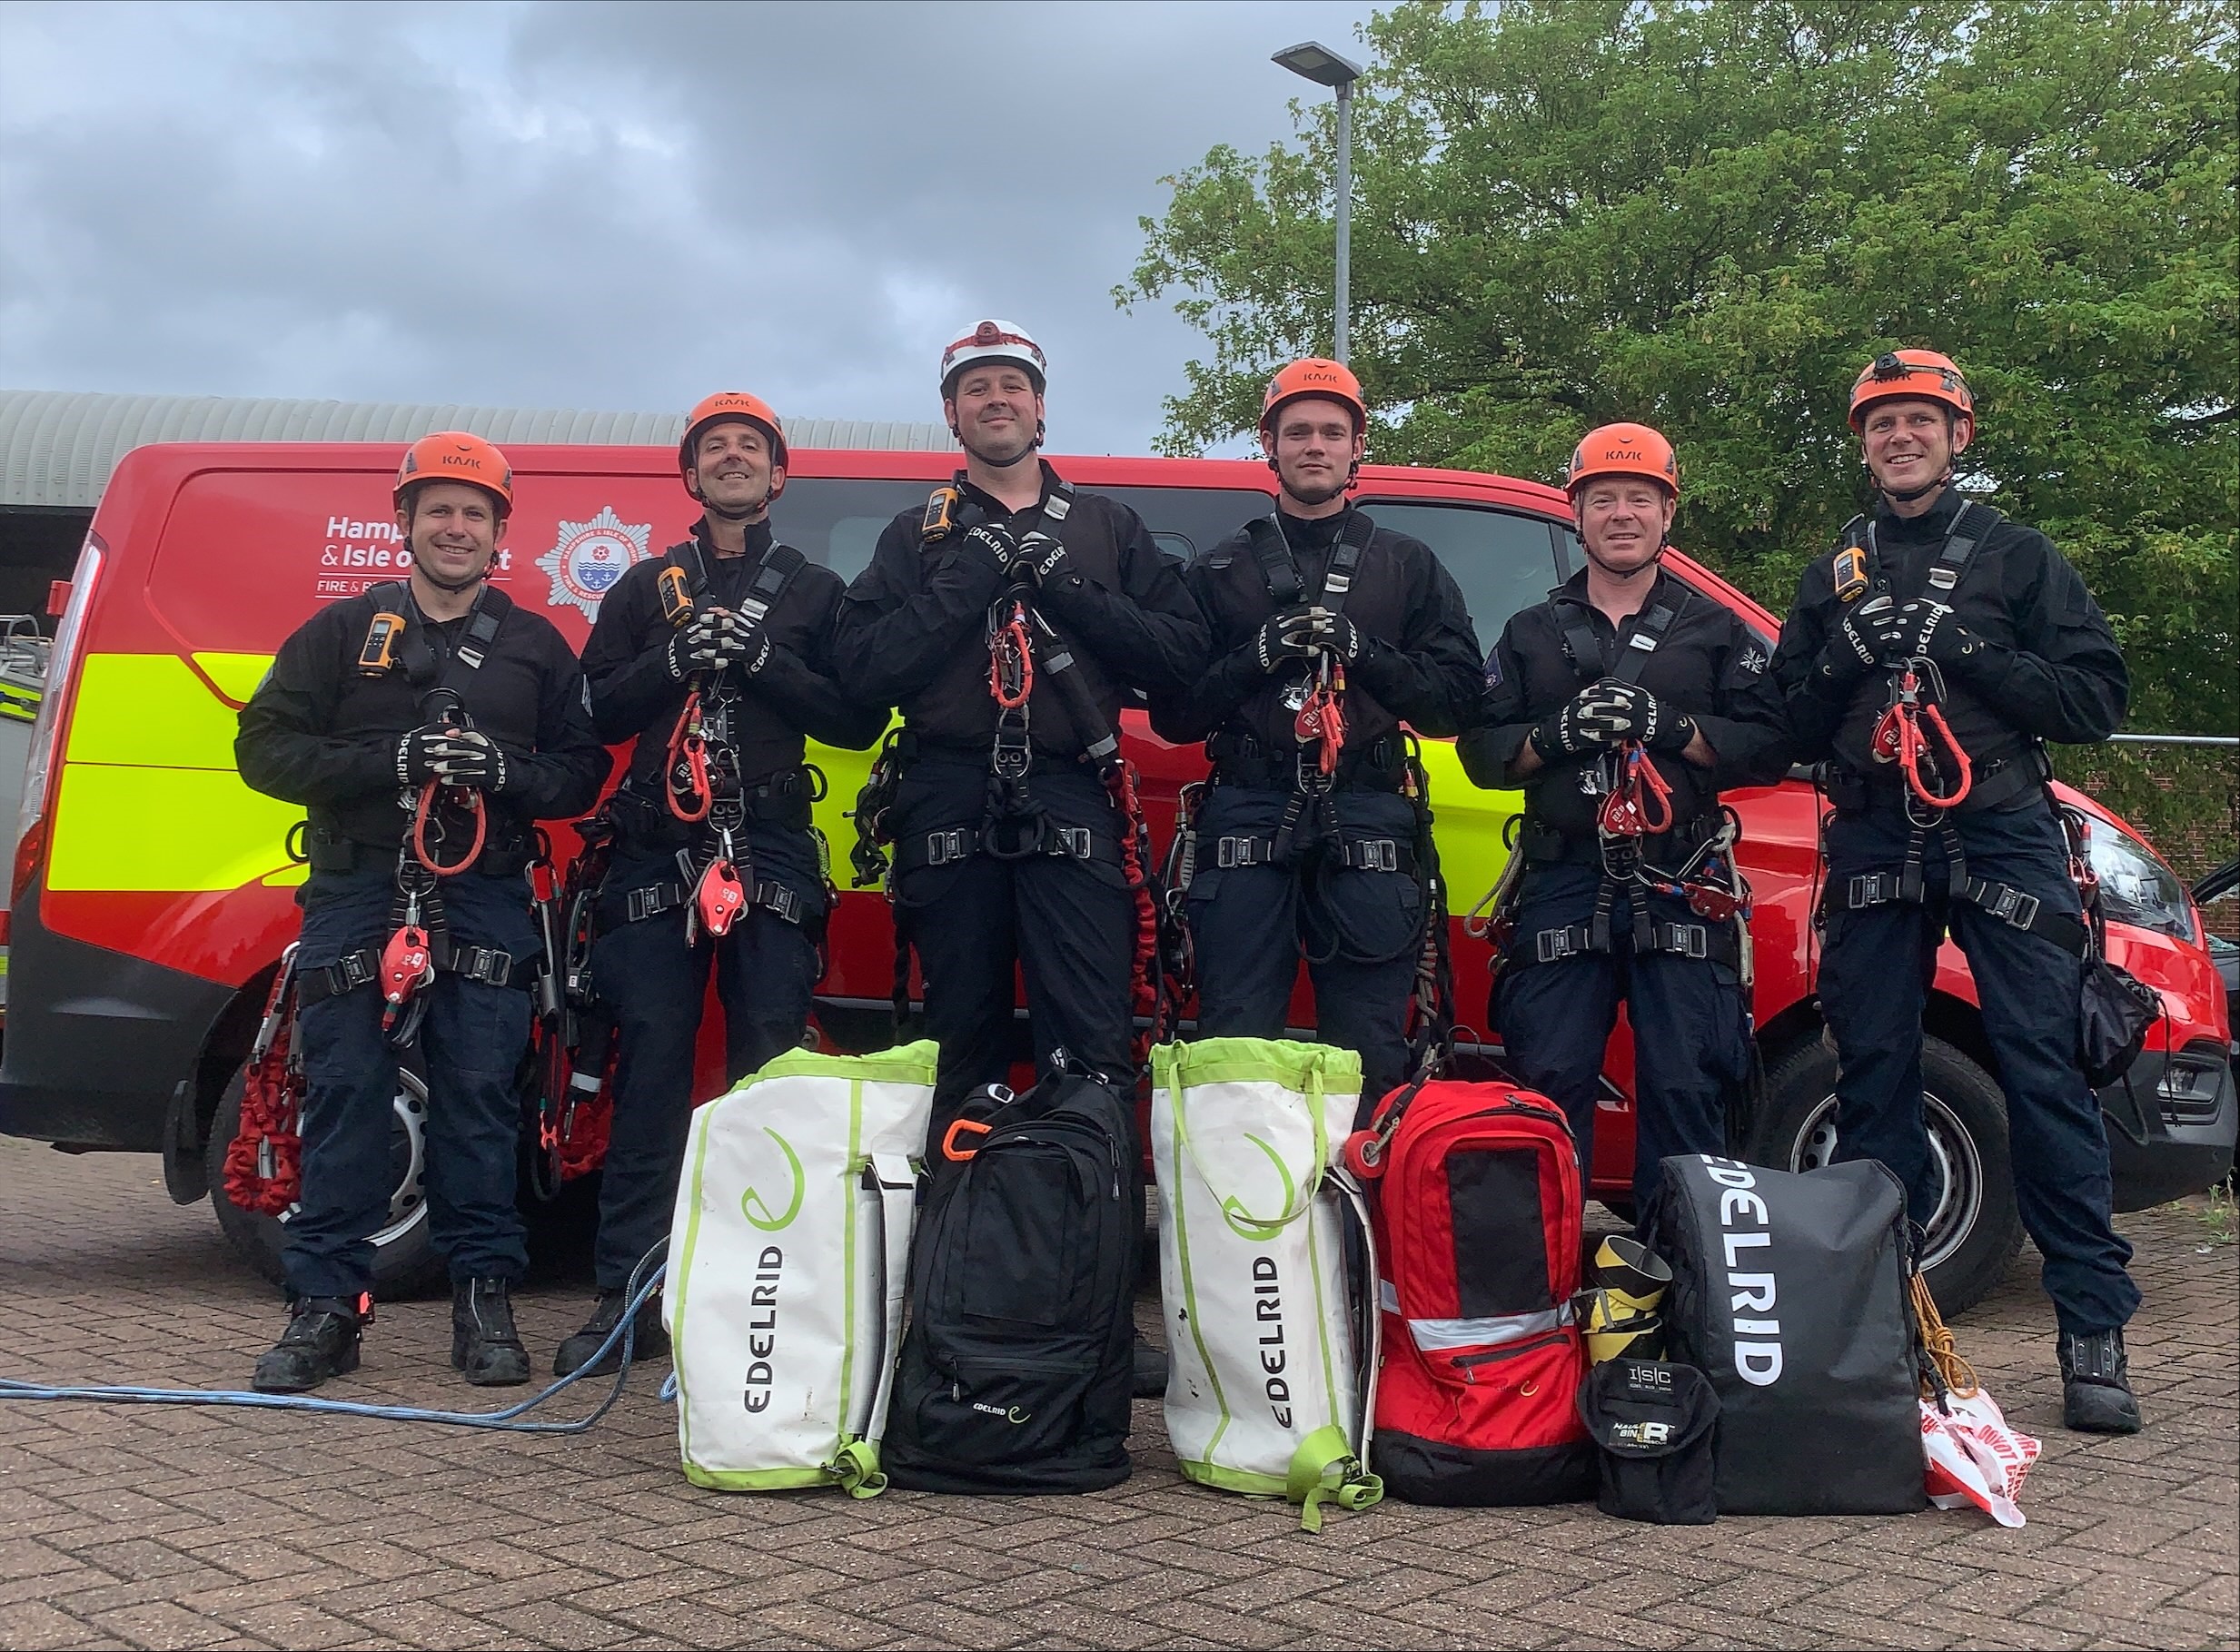 Hampshire and Isle of Wight Fire and Rescue Service - rope team